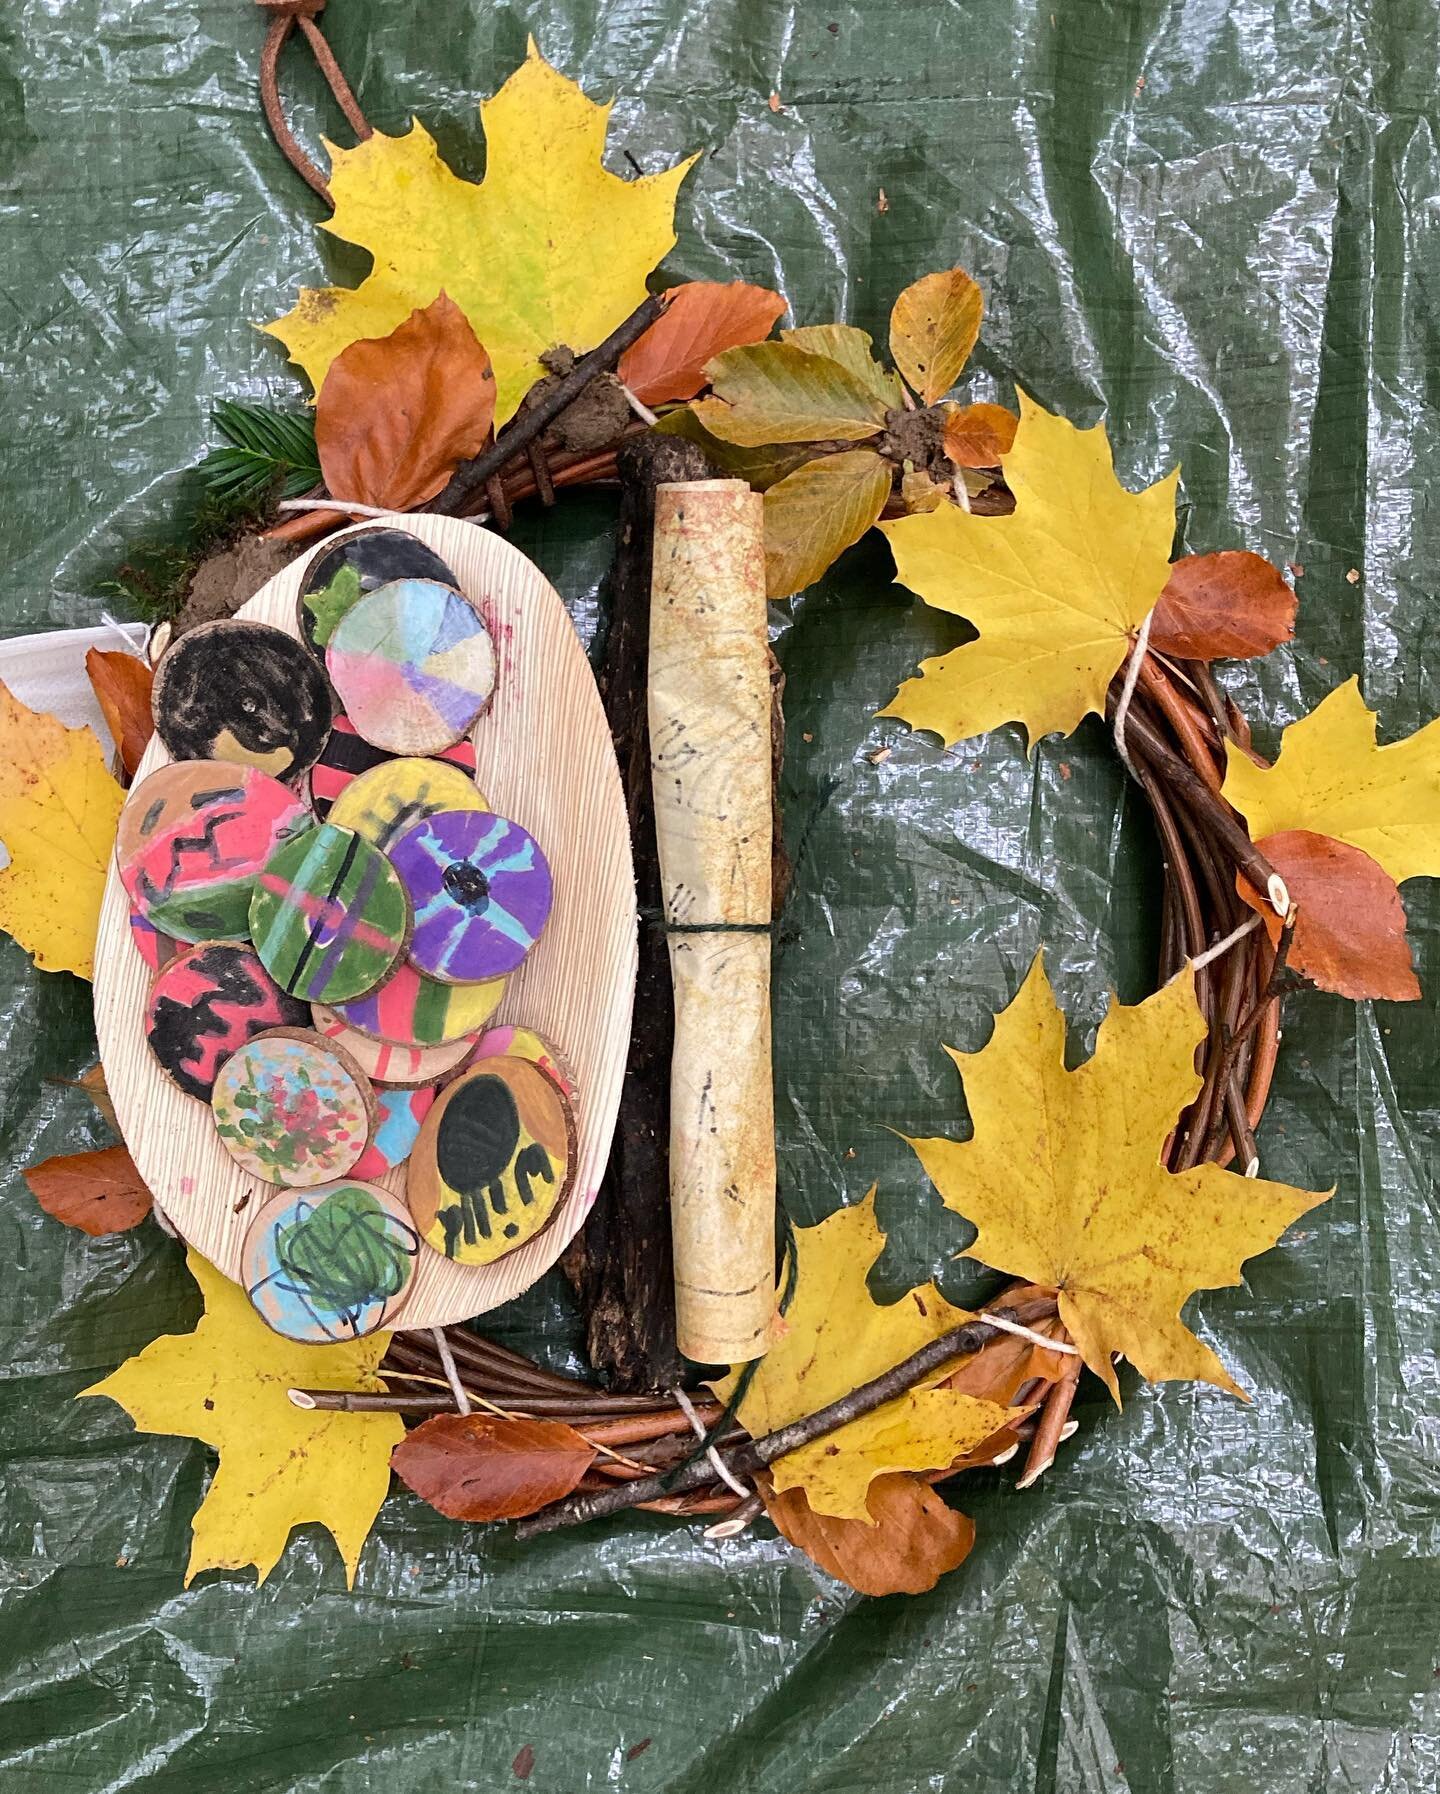 Last week we marked the end of Phase 5 of The Nest at Pollok Park by decorating a wreath with mementoes from the woods, creating wooden tokens, making leaf garlands, broomsticks, face painting, dens, jailbreak, microscopes, mushroom ID, the wild moon